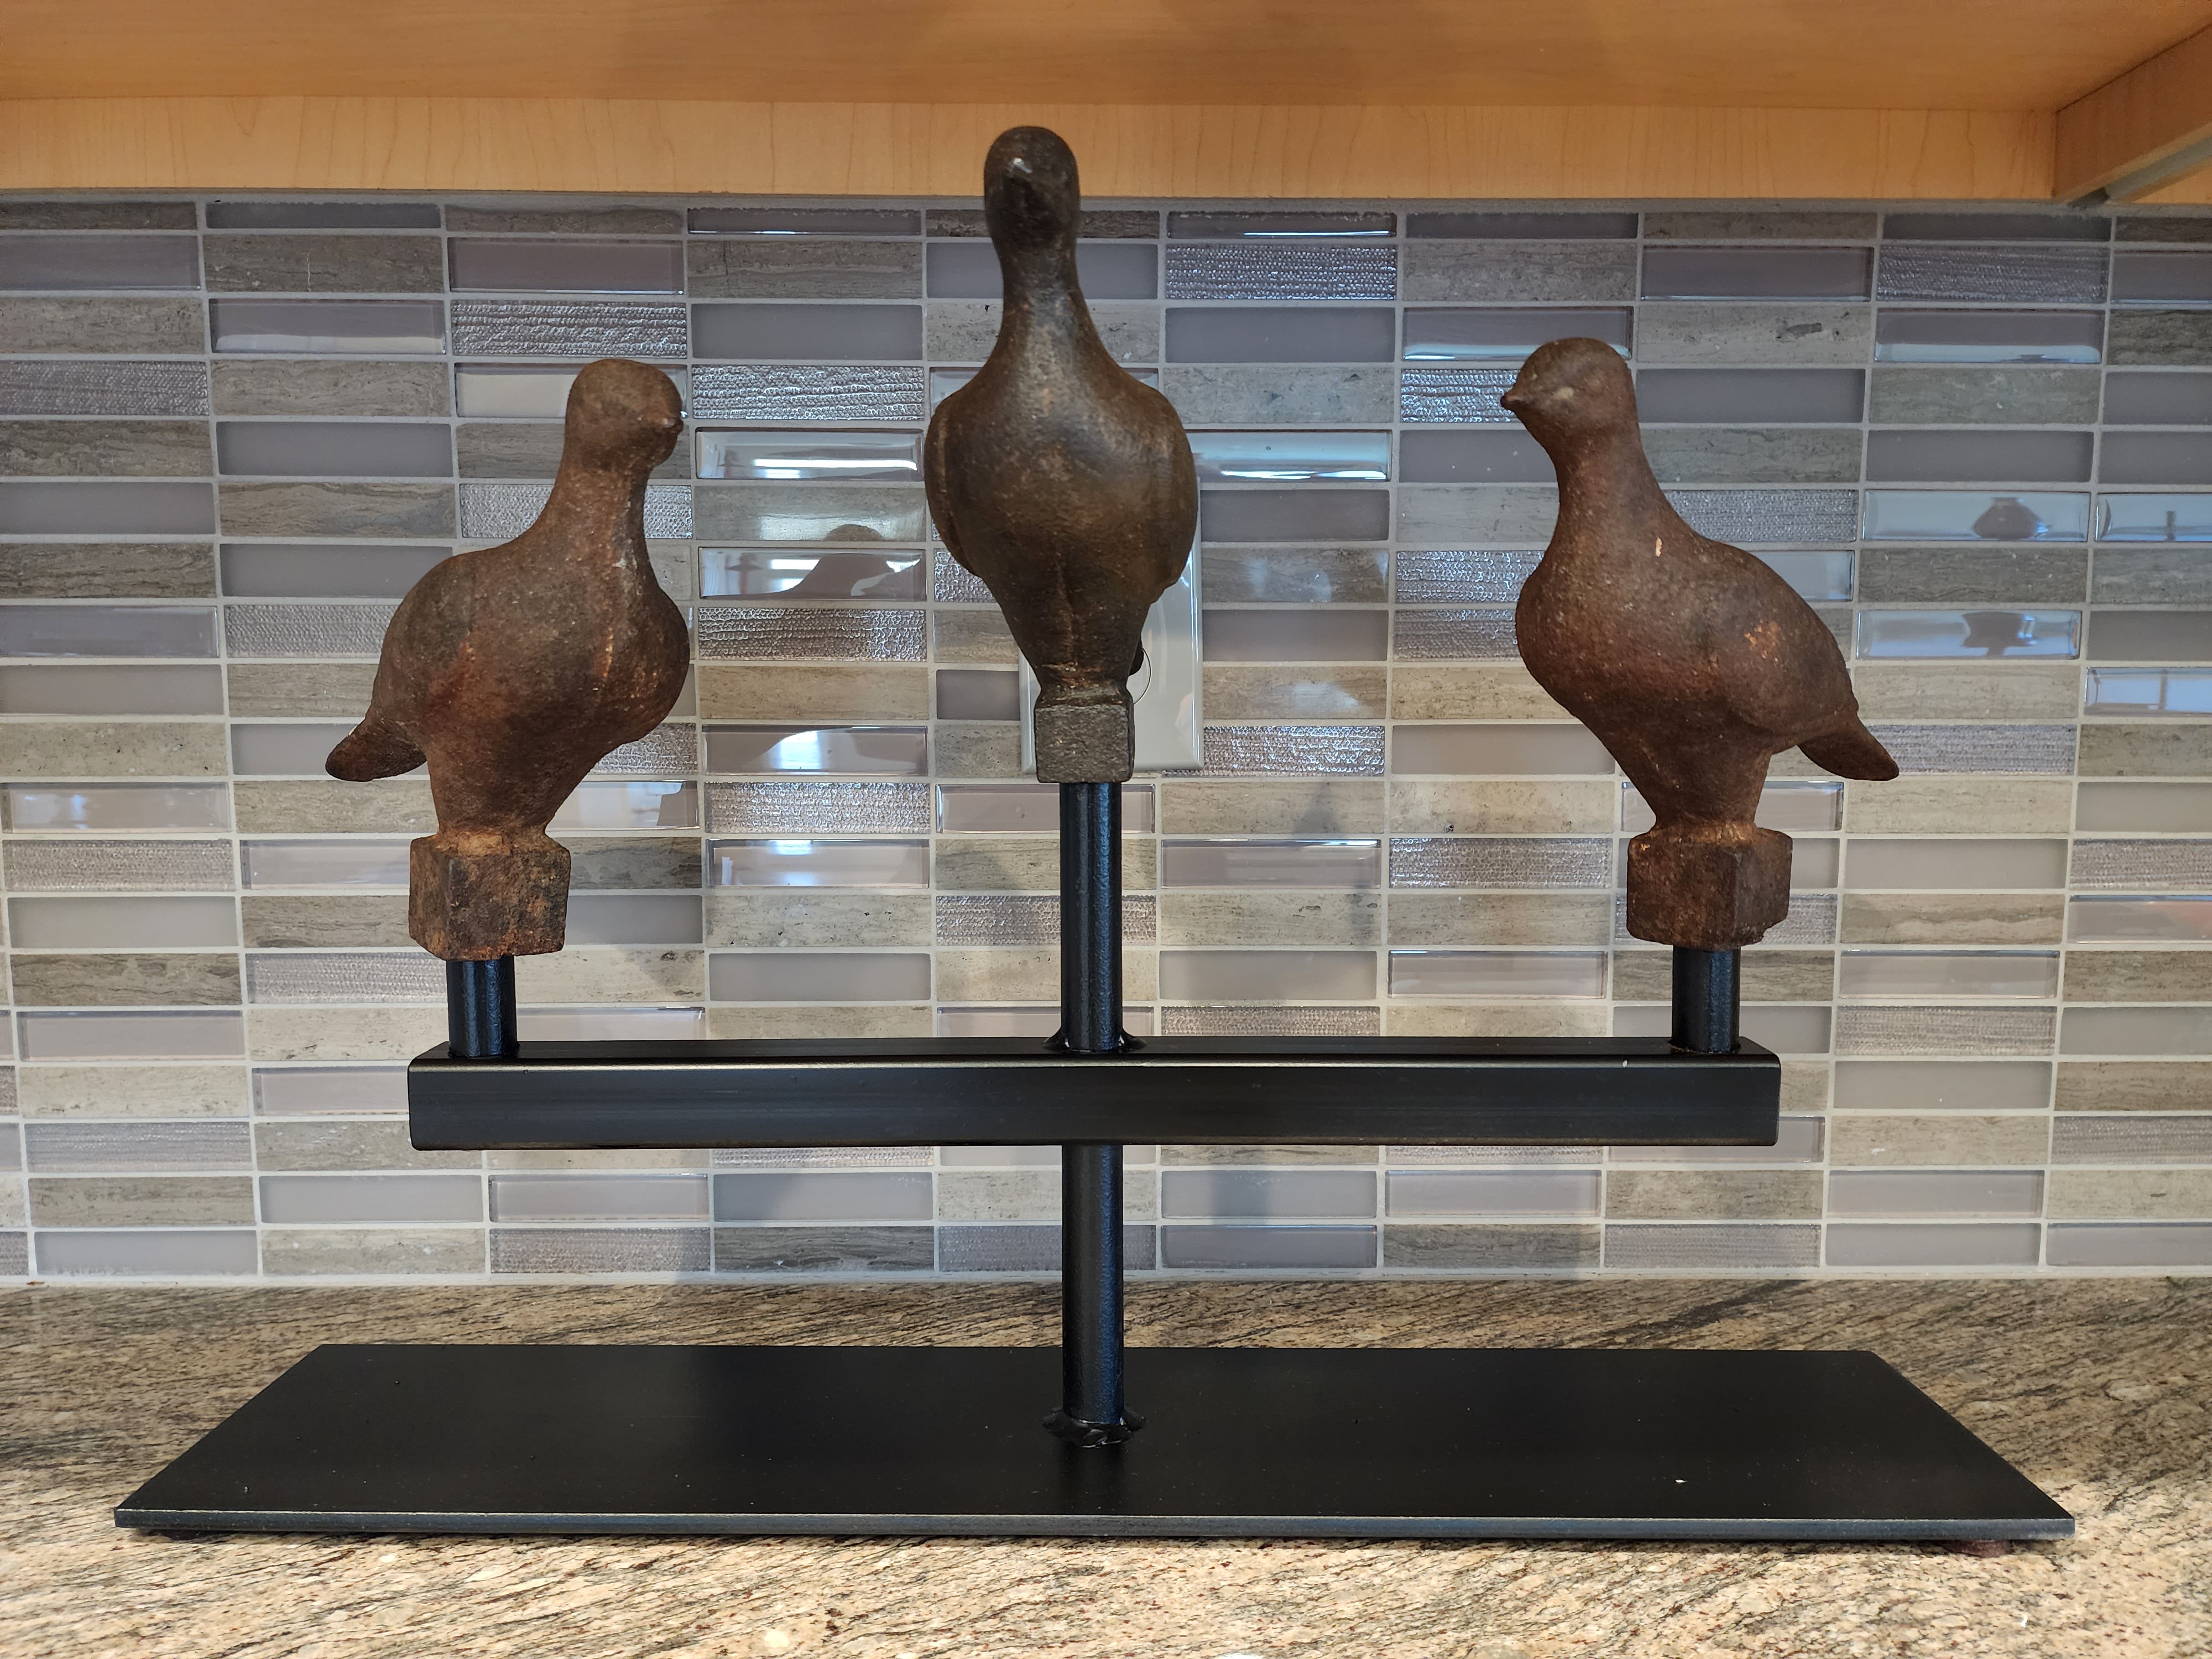 3 CAST IRON FINIALS IN THE FORM OF BIRDS